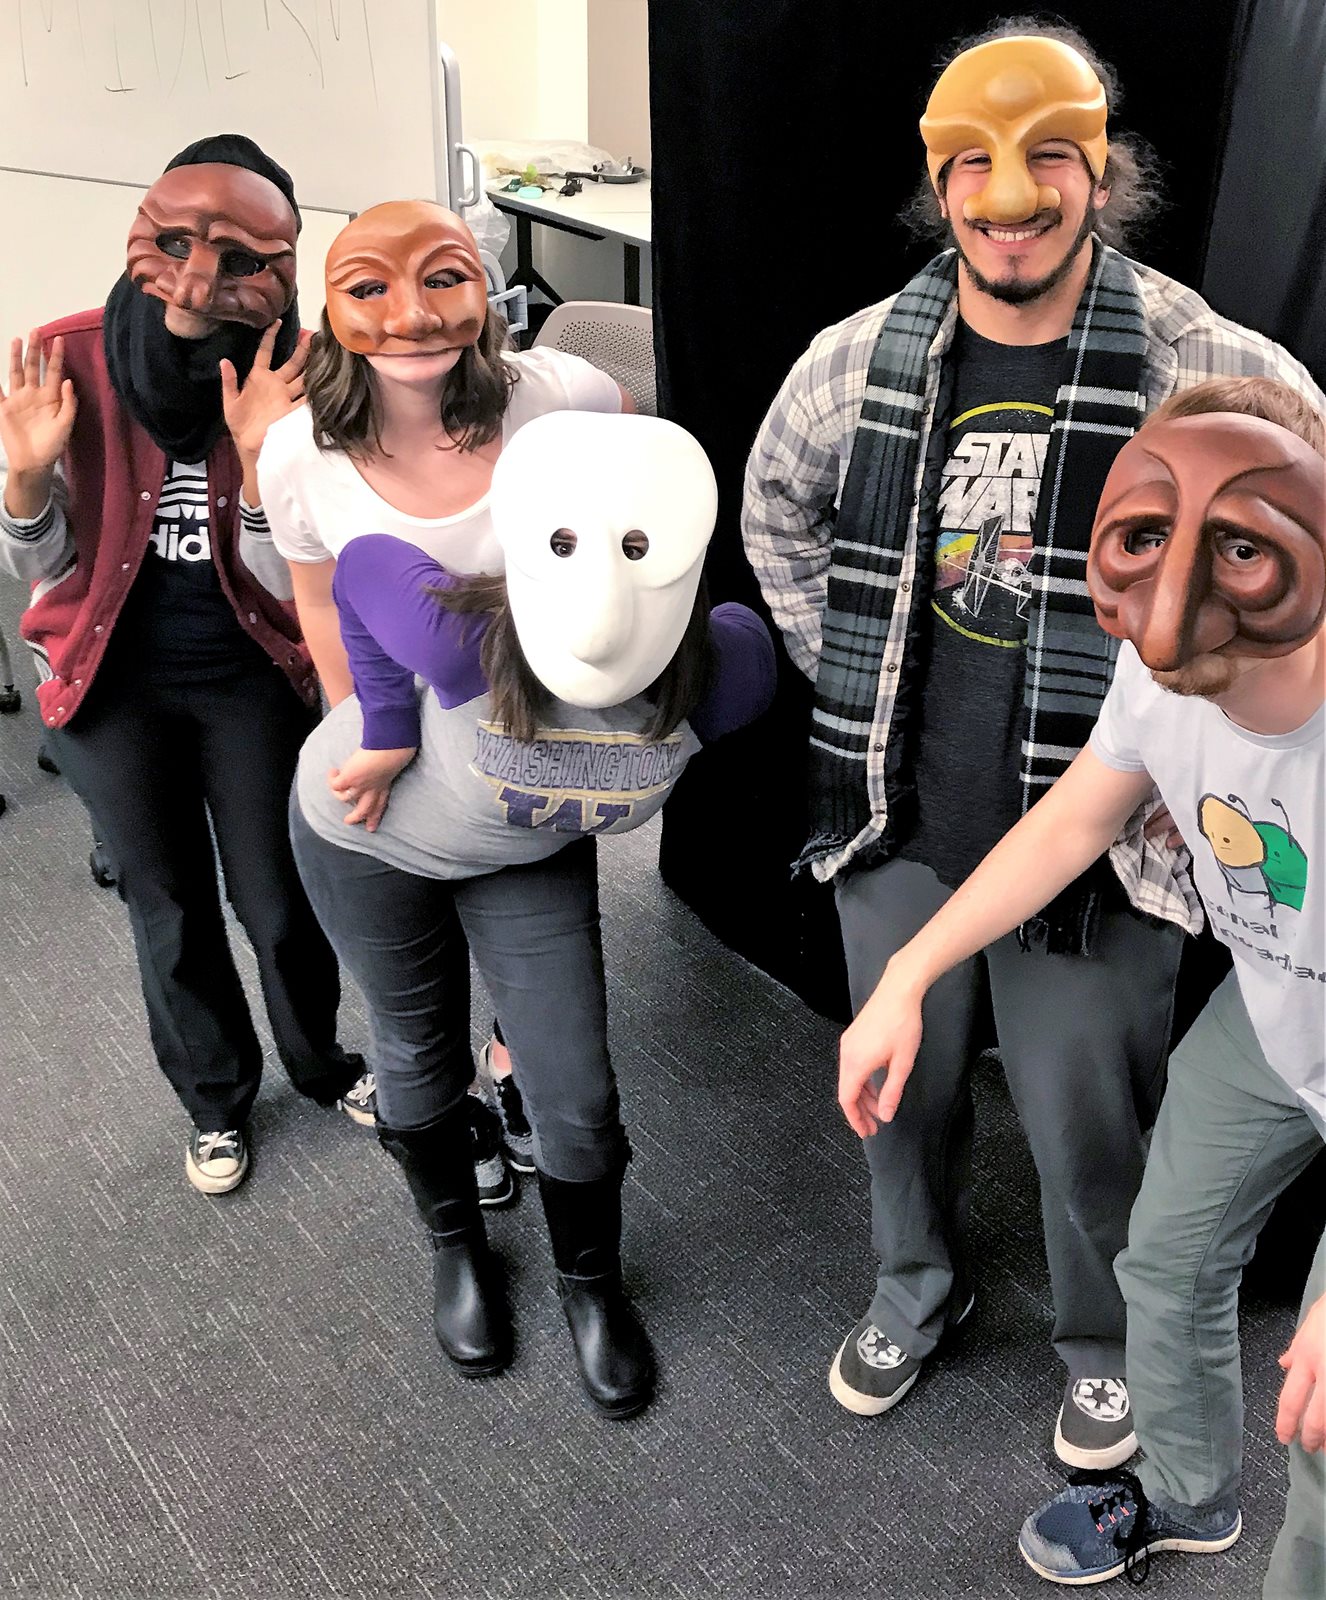 Five students in masks